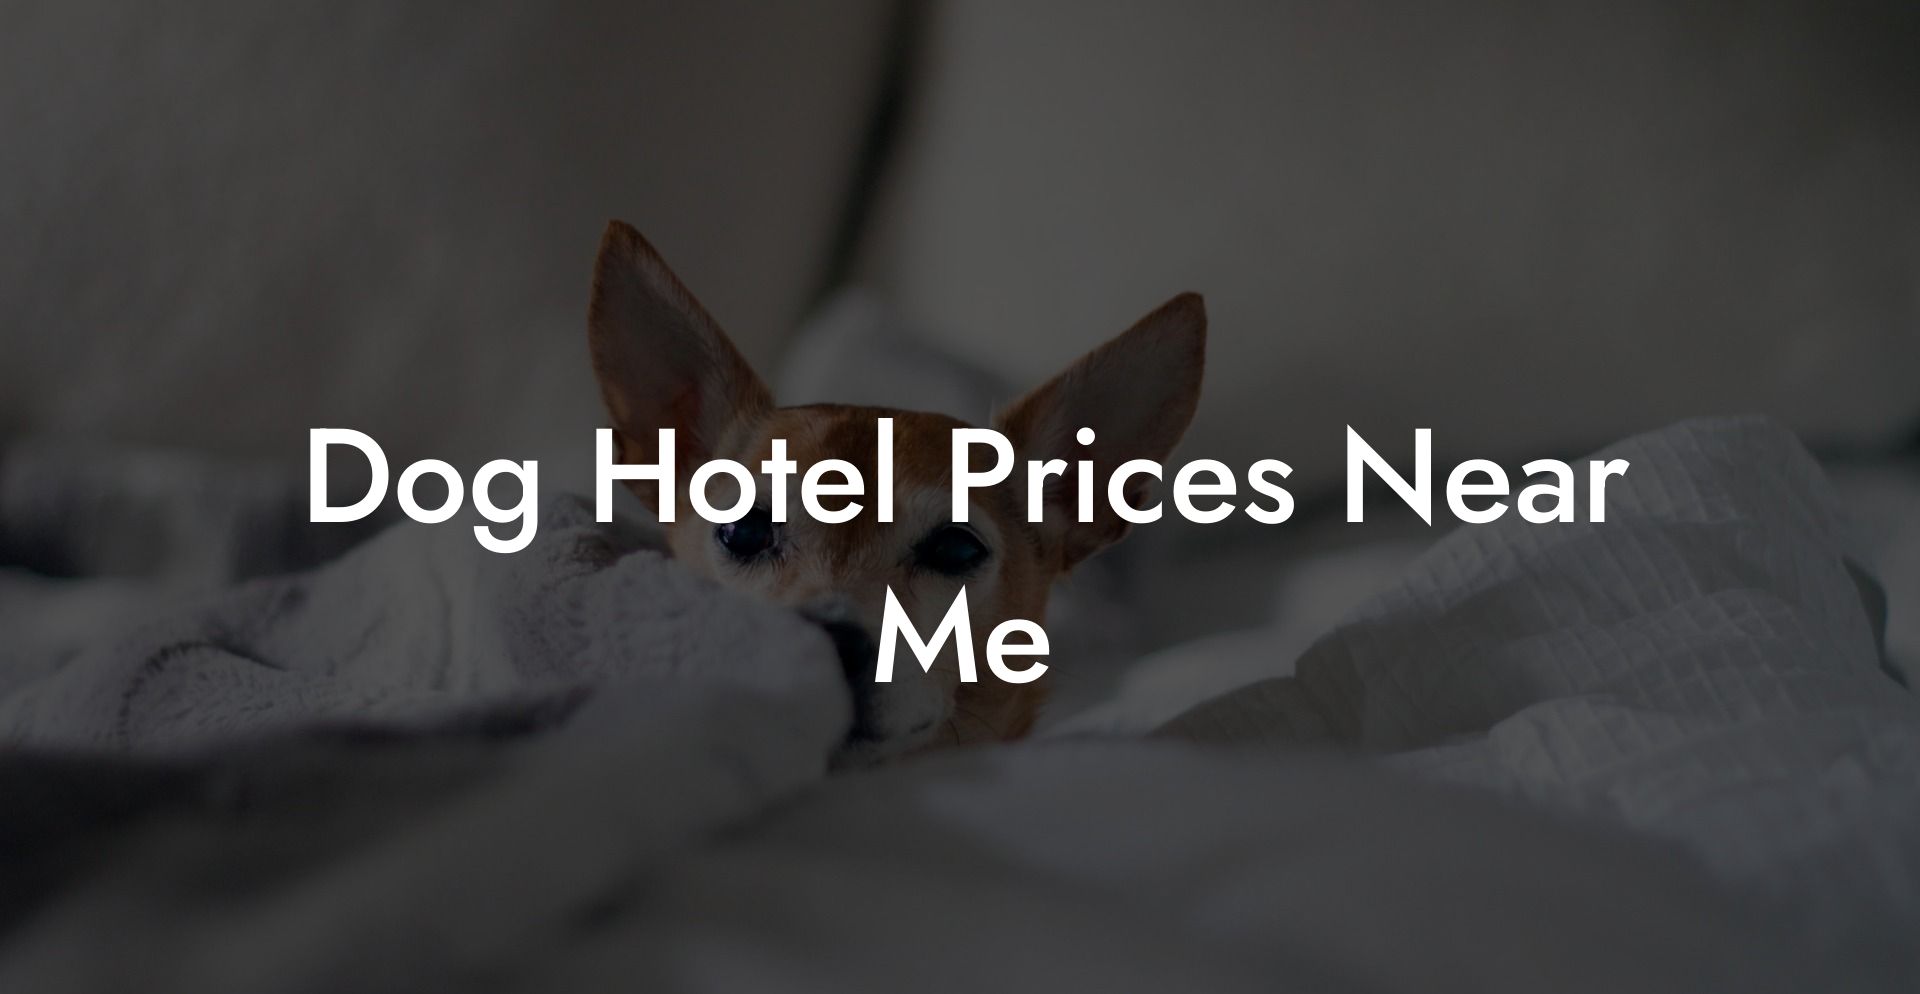 Dog Hotel Prices Near Me